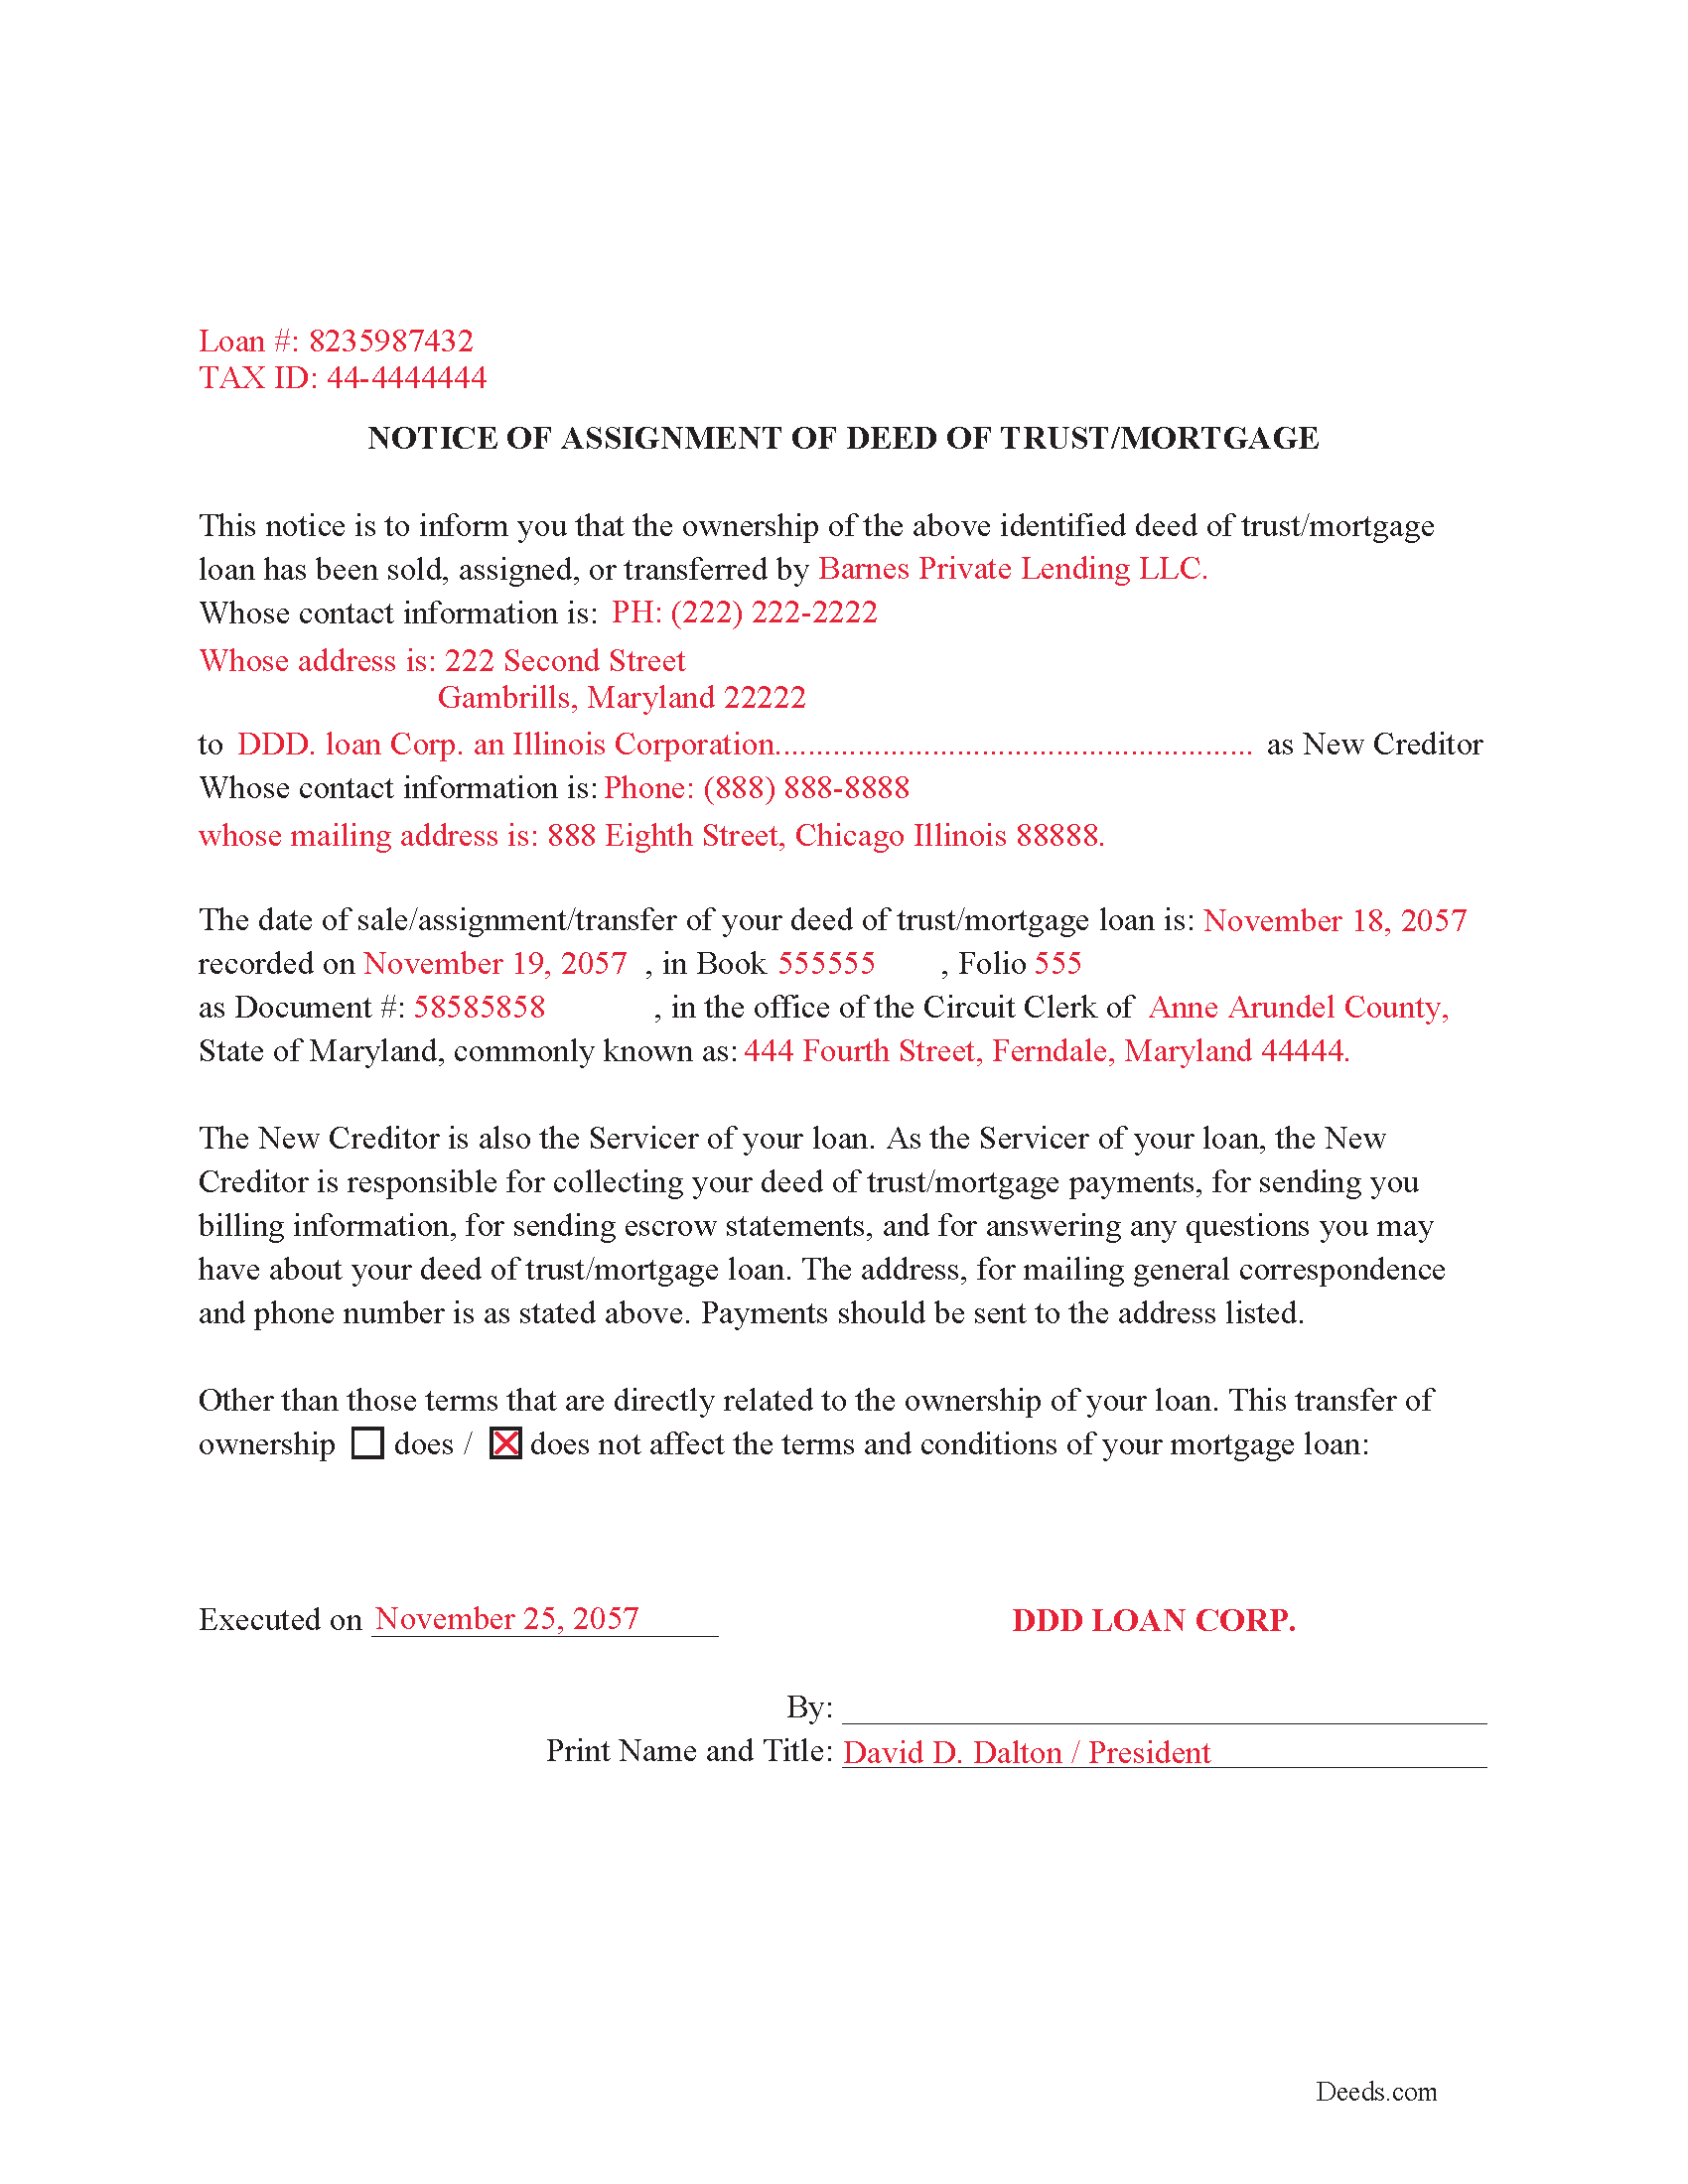 Completed Example of the Assignment of Deed of Trust-Mortgage Document